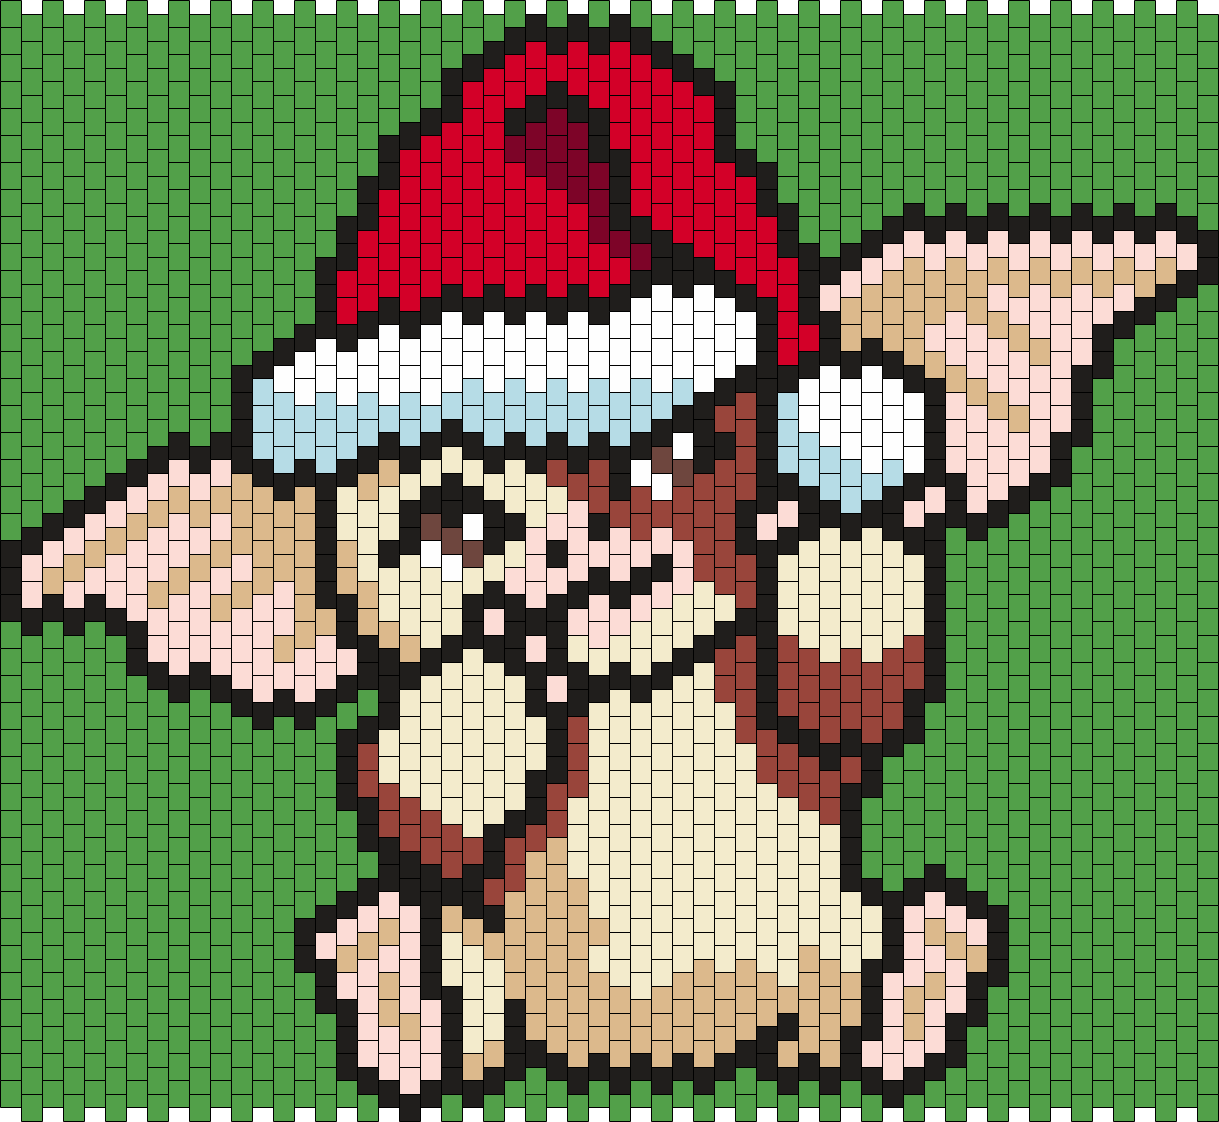 Gizmo In A Santa Hat (from Gremlins)